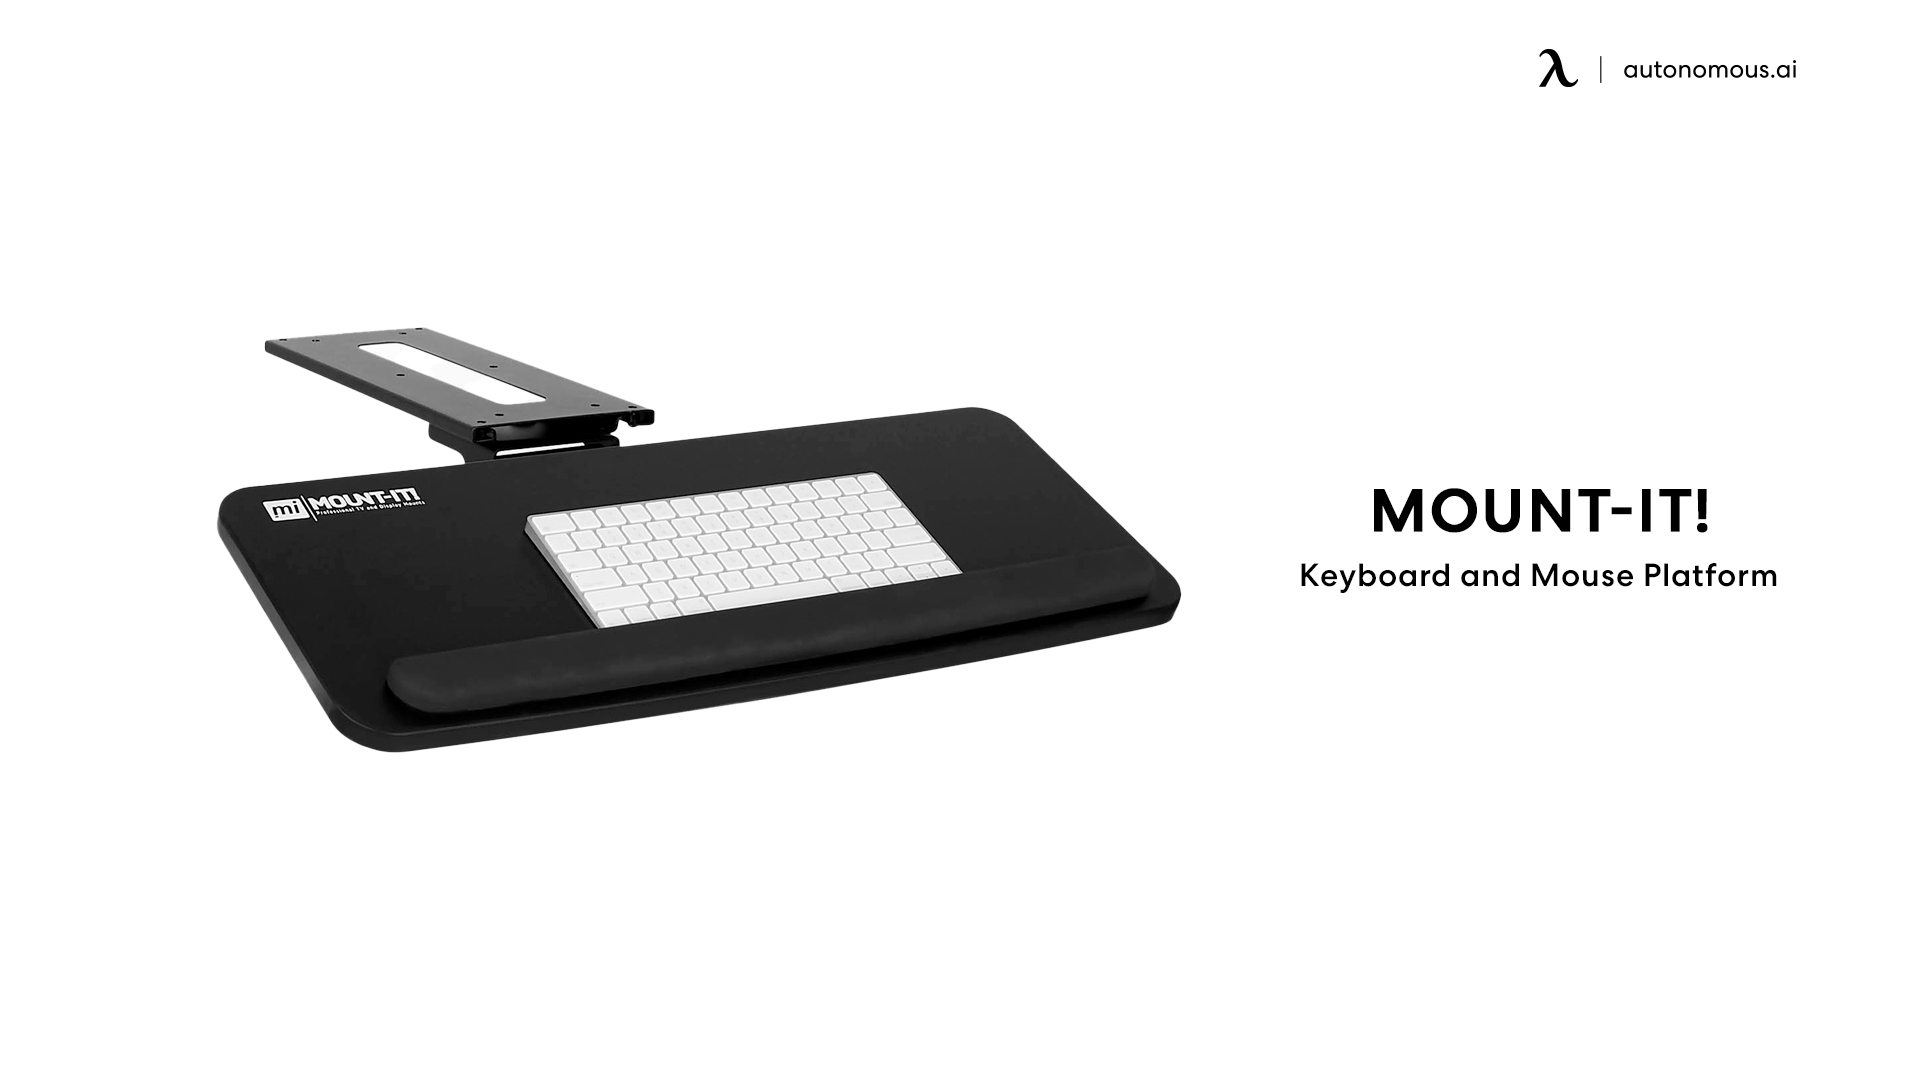 Keyboard and Mouse Platform by Mount-It!